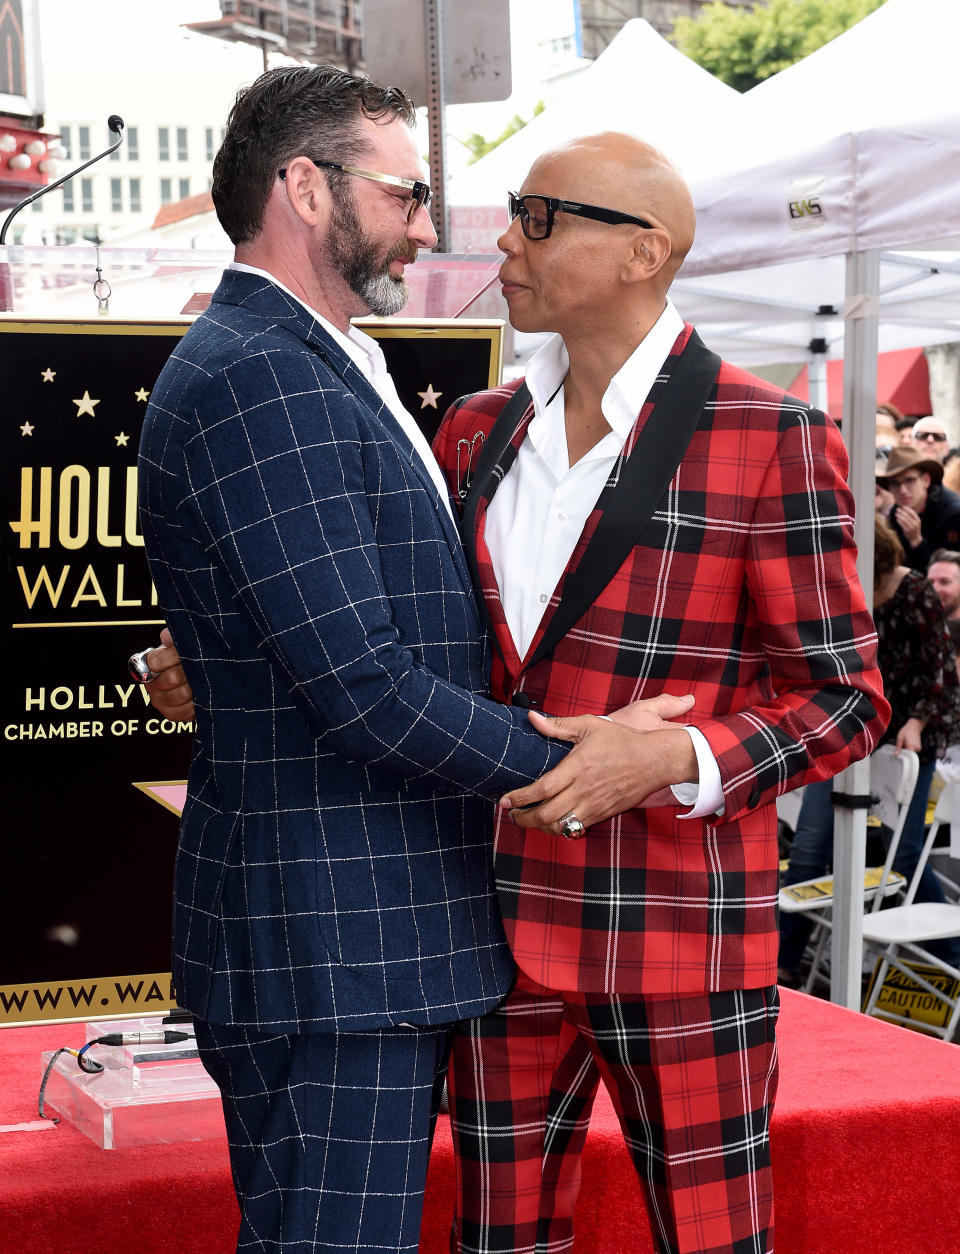 Georges and RuPaul hugging on a red carpet